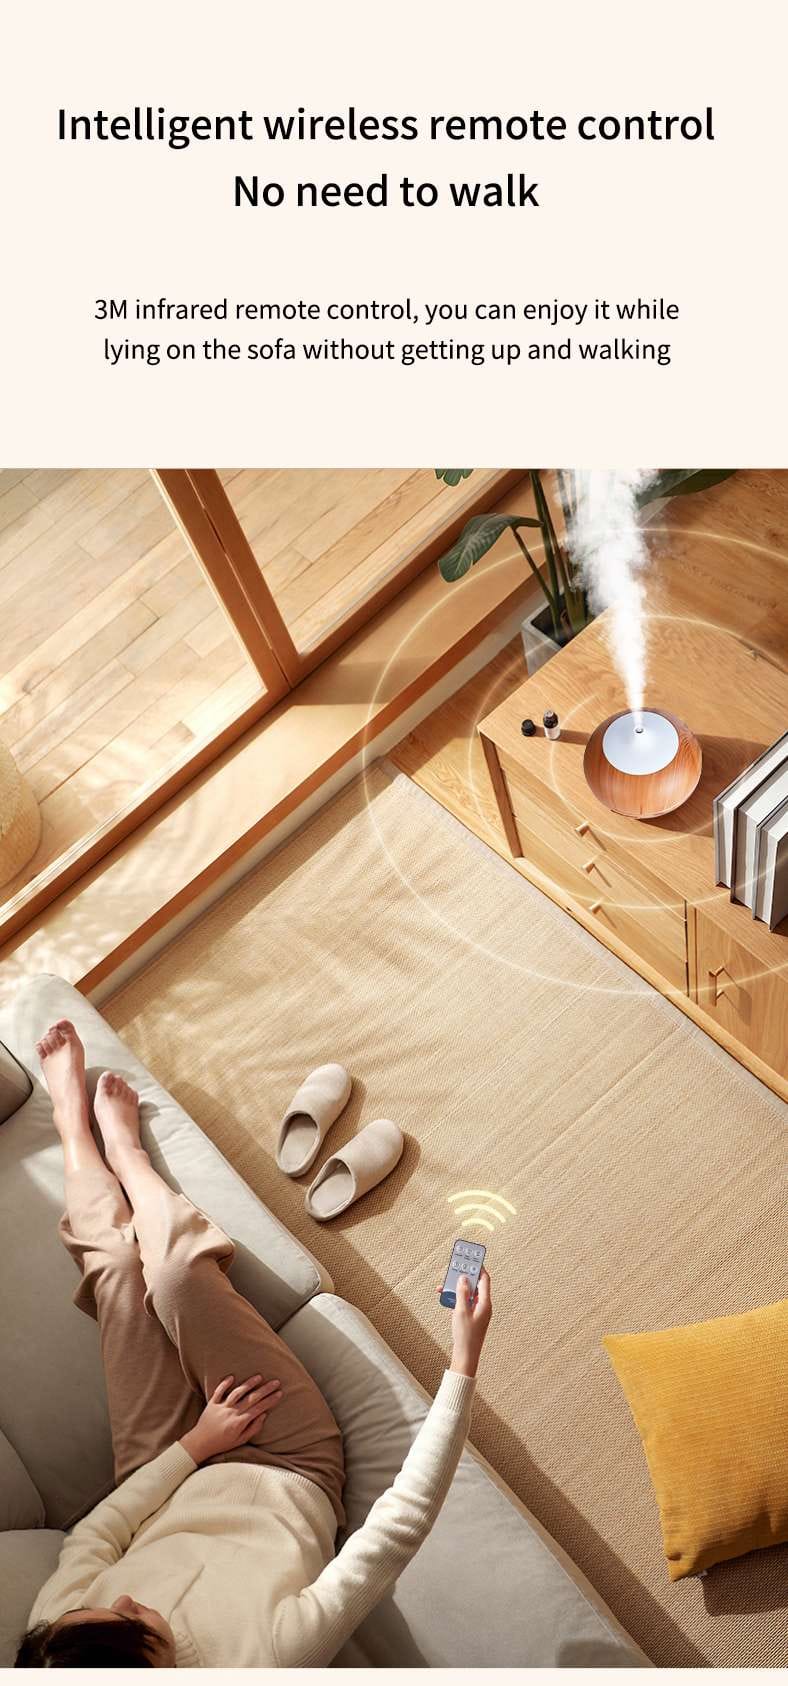 Electric Aroma Diffuser Essential oil diffuser Air Humidifier Ultrasonic Remote Control Color LED Lamp Mist Maker Home